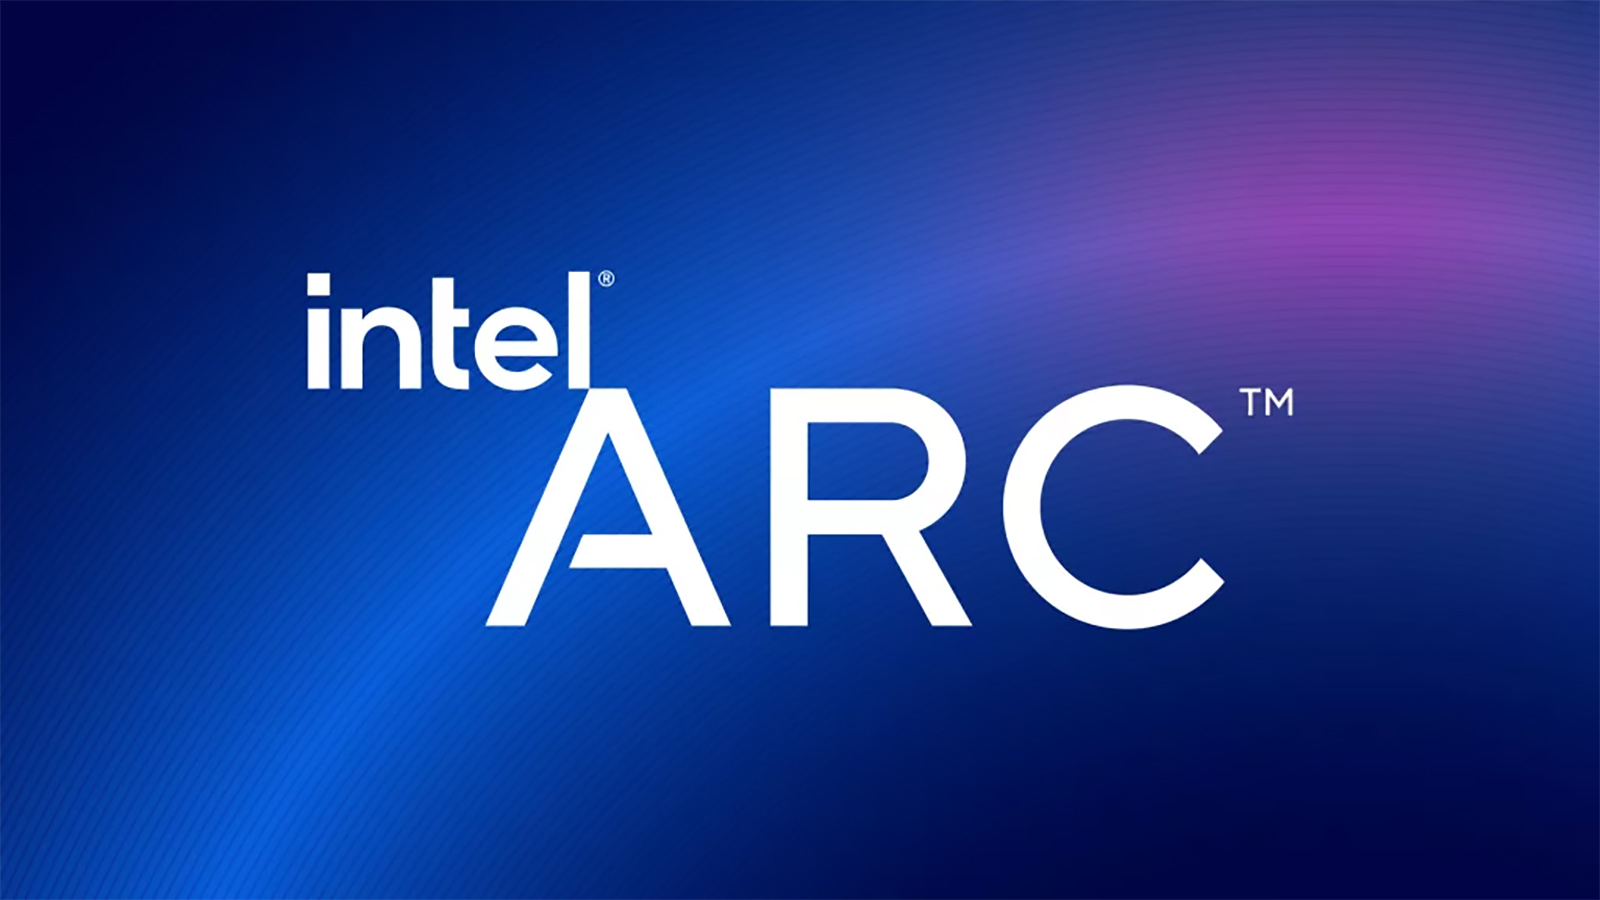 Intel will soon announce new Line of Arc laptop GPUs